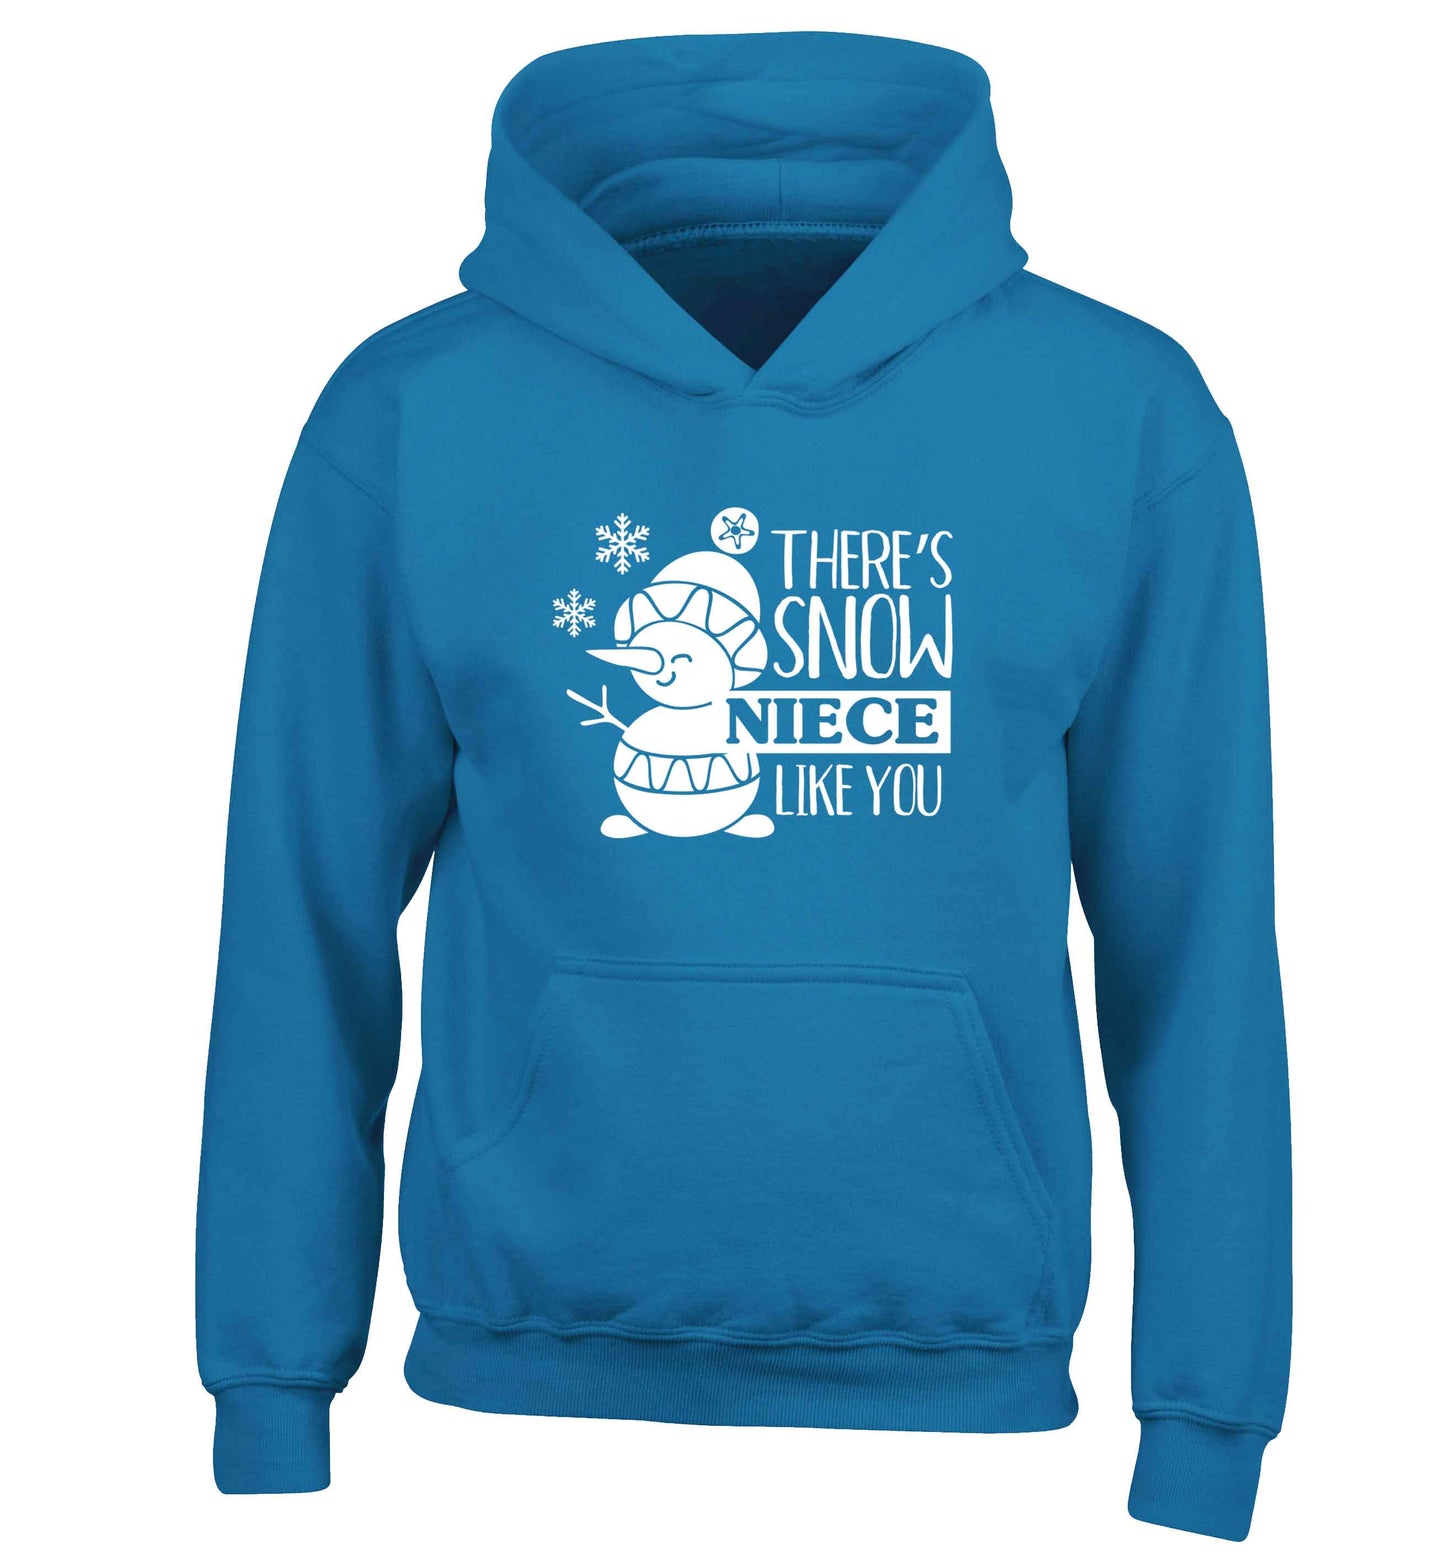 There's snow niece like you children's blue hoodie 12-13 Years